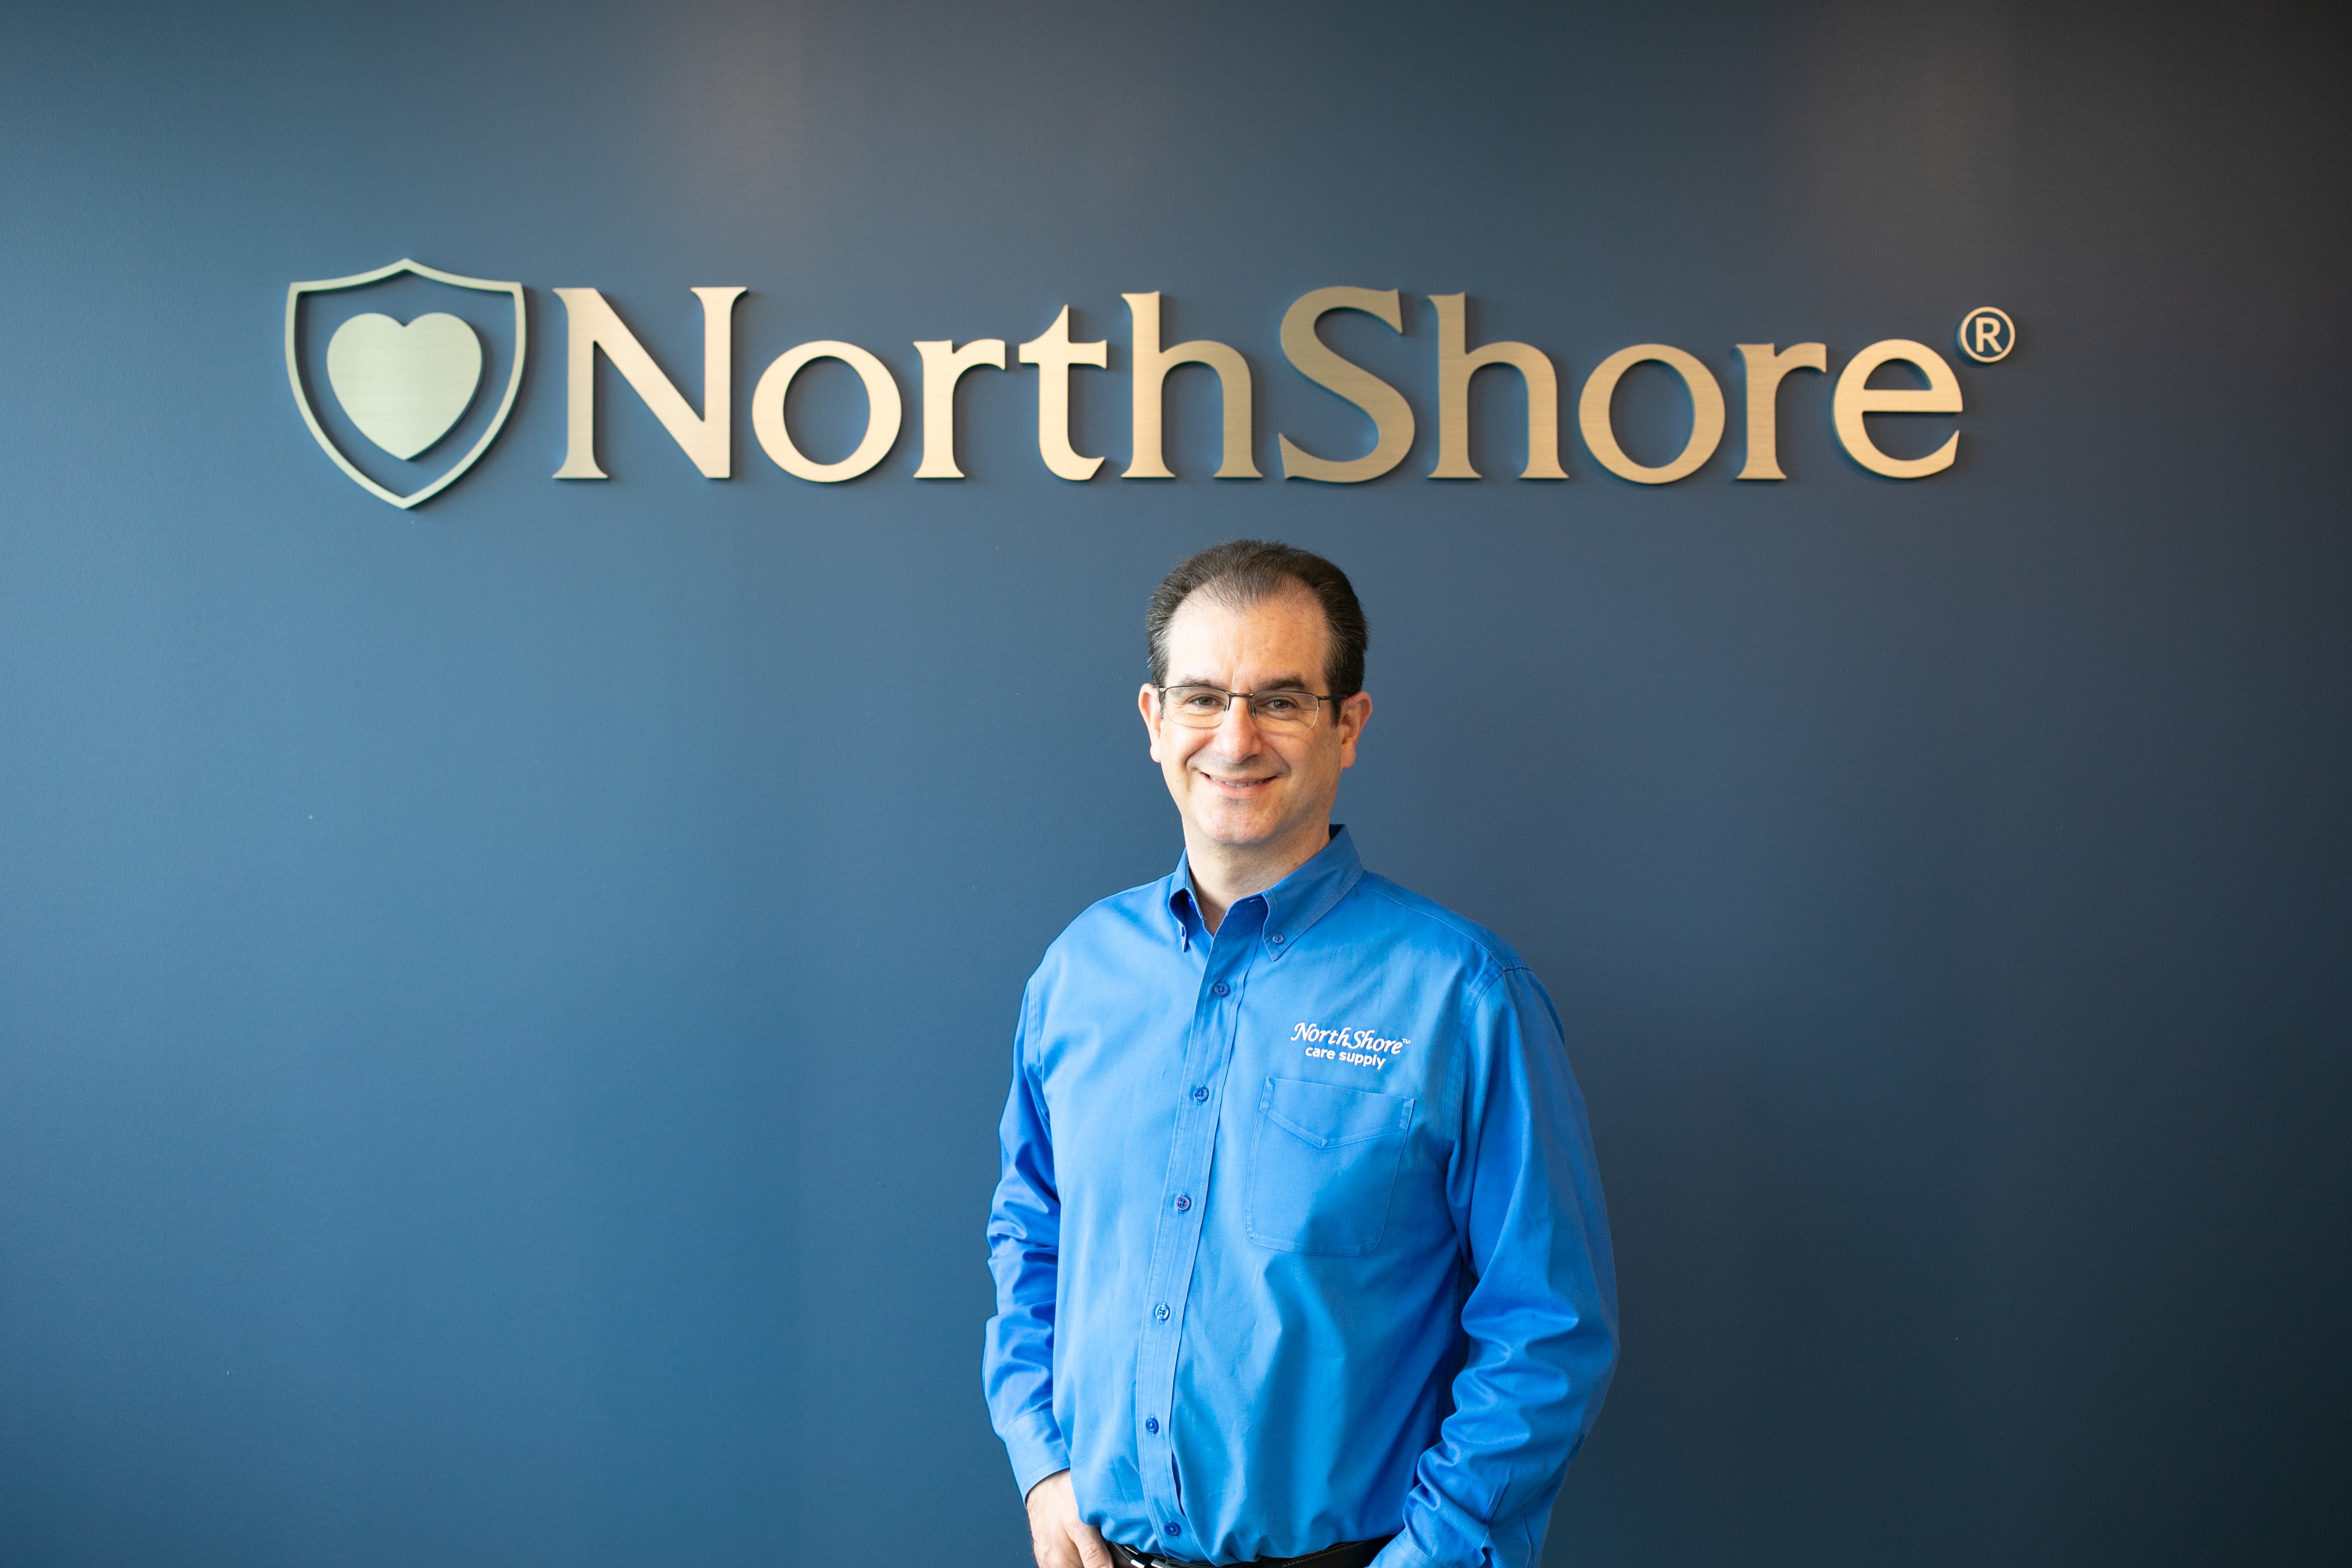 Founder, Adam Greenberg in front of NorthShore interior sign